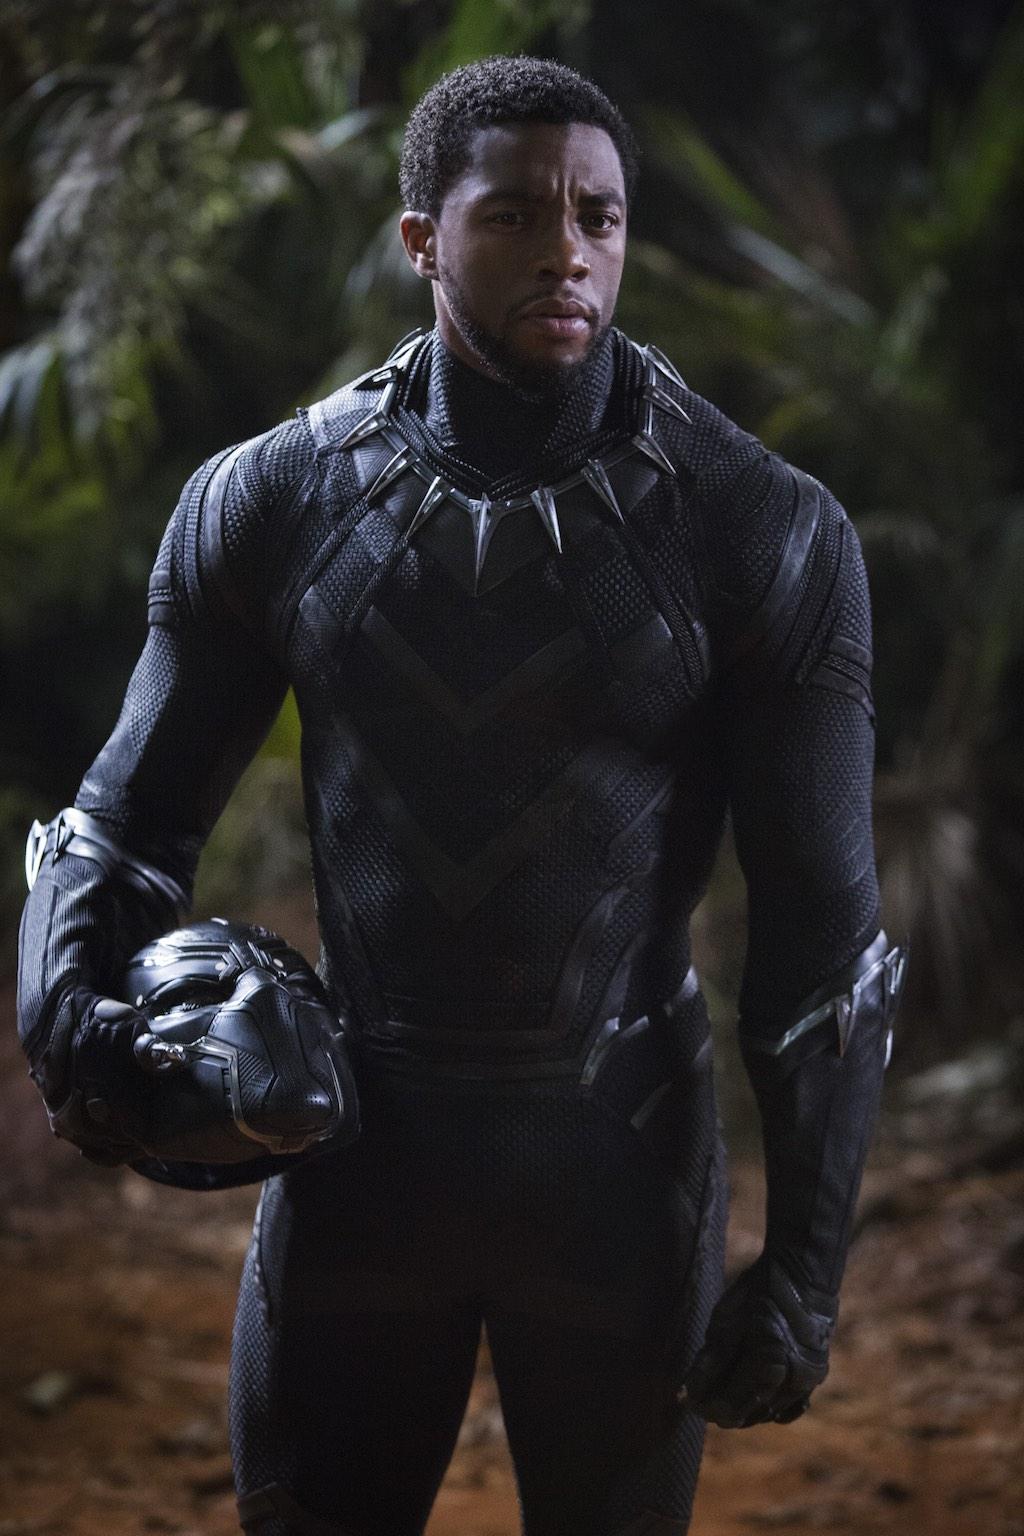 Borrow discretion Belongs Black Panther: Welcome to Wakanda - Fashion and Costume Design in Focus |  Fashion Africa Now